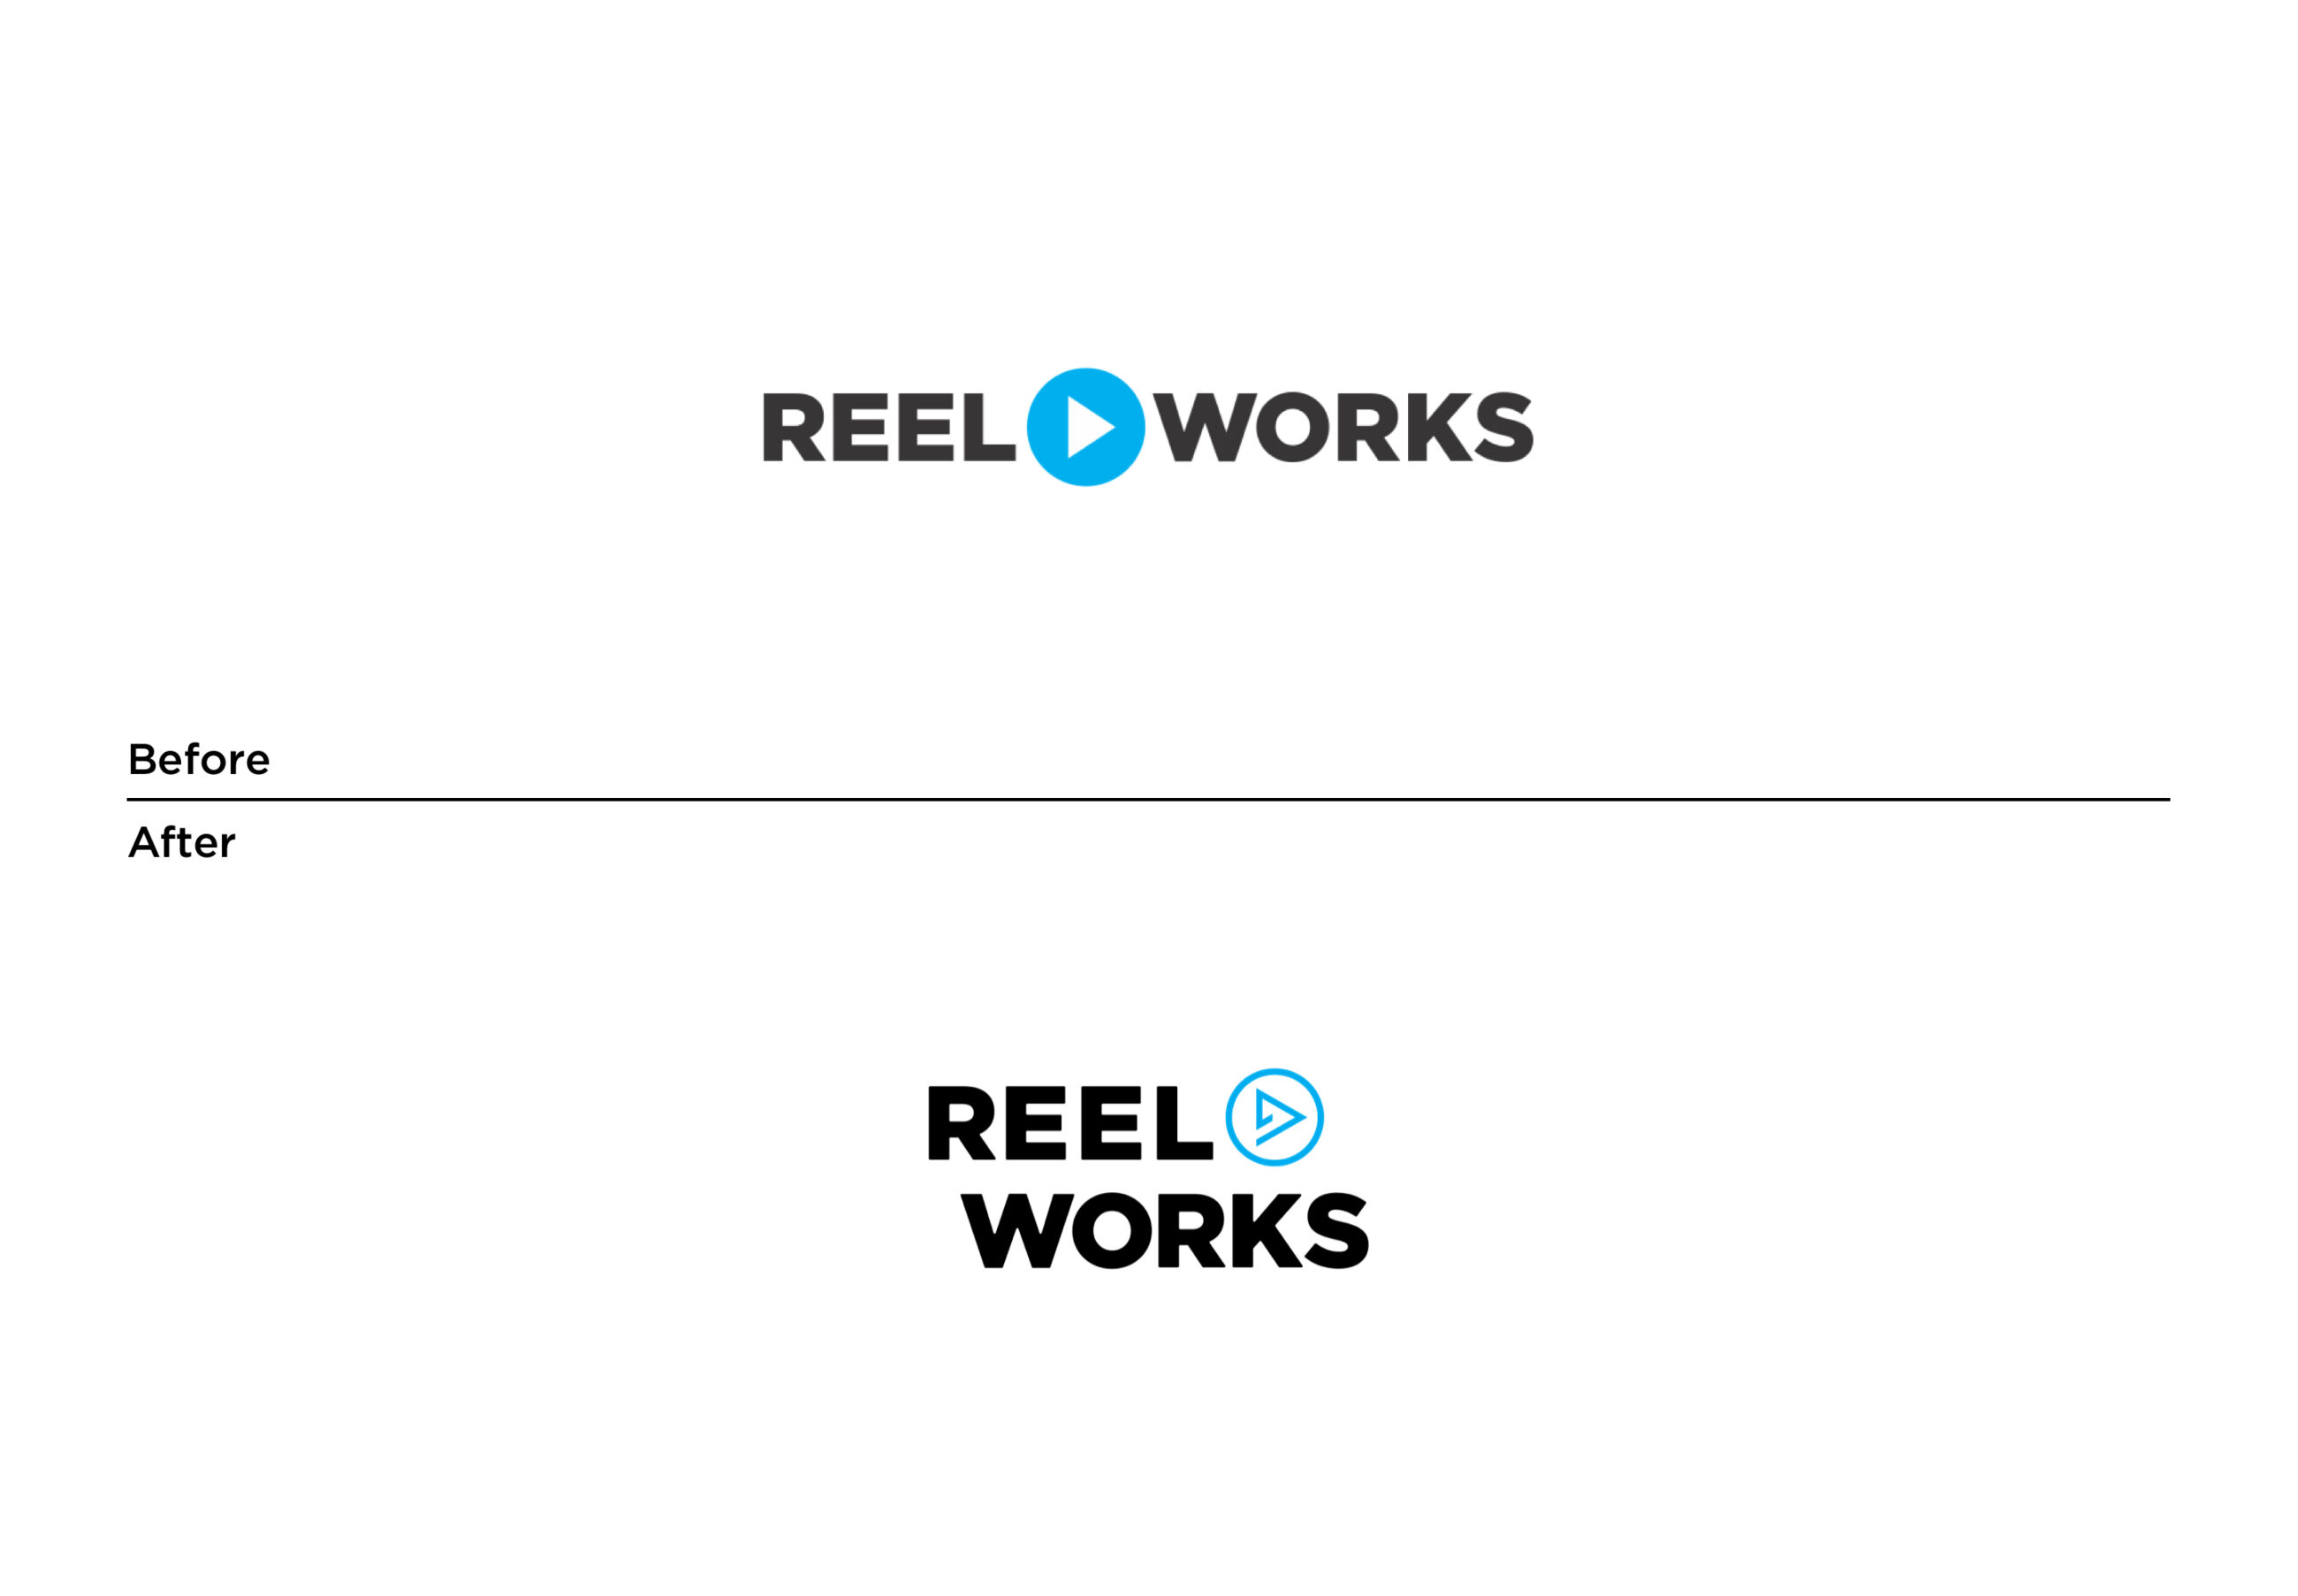 Before and after for Reel Works logo refresh